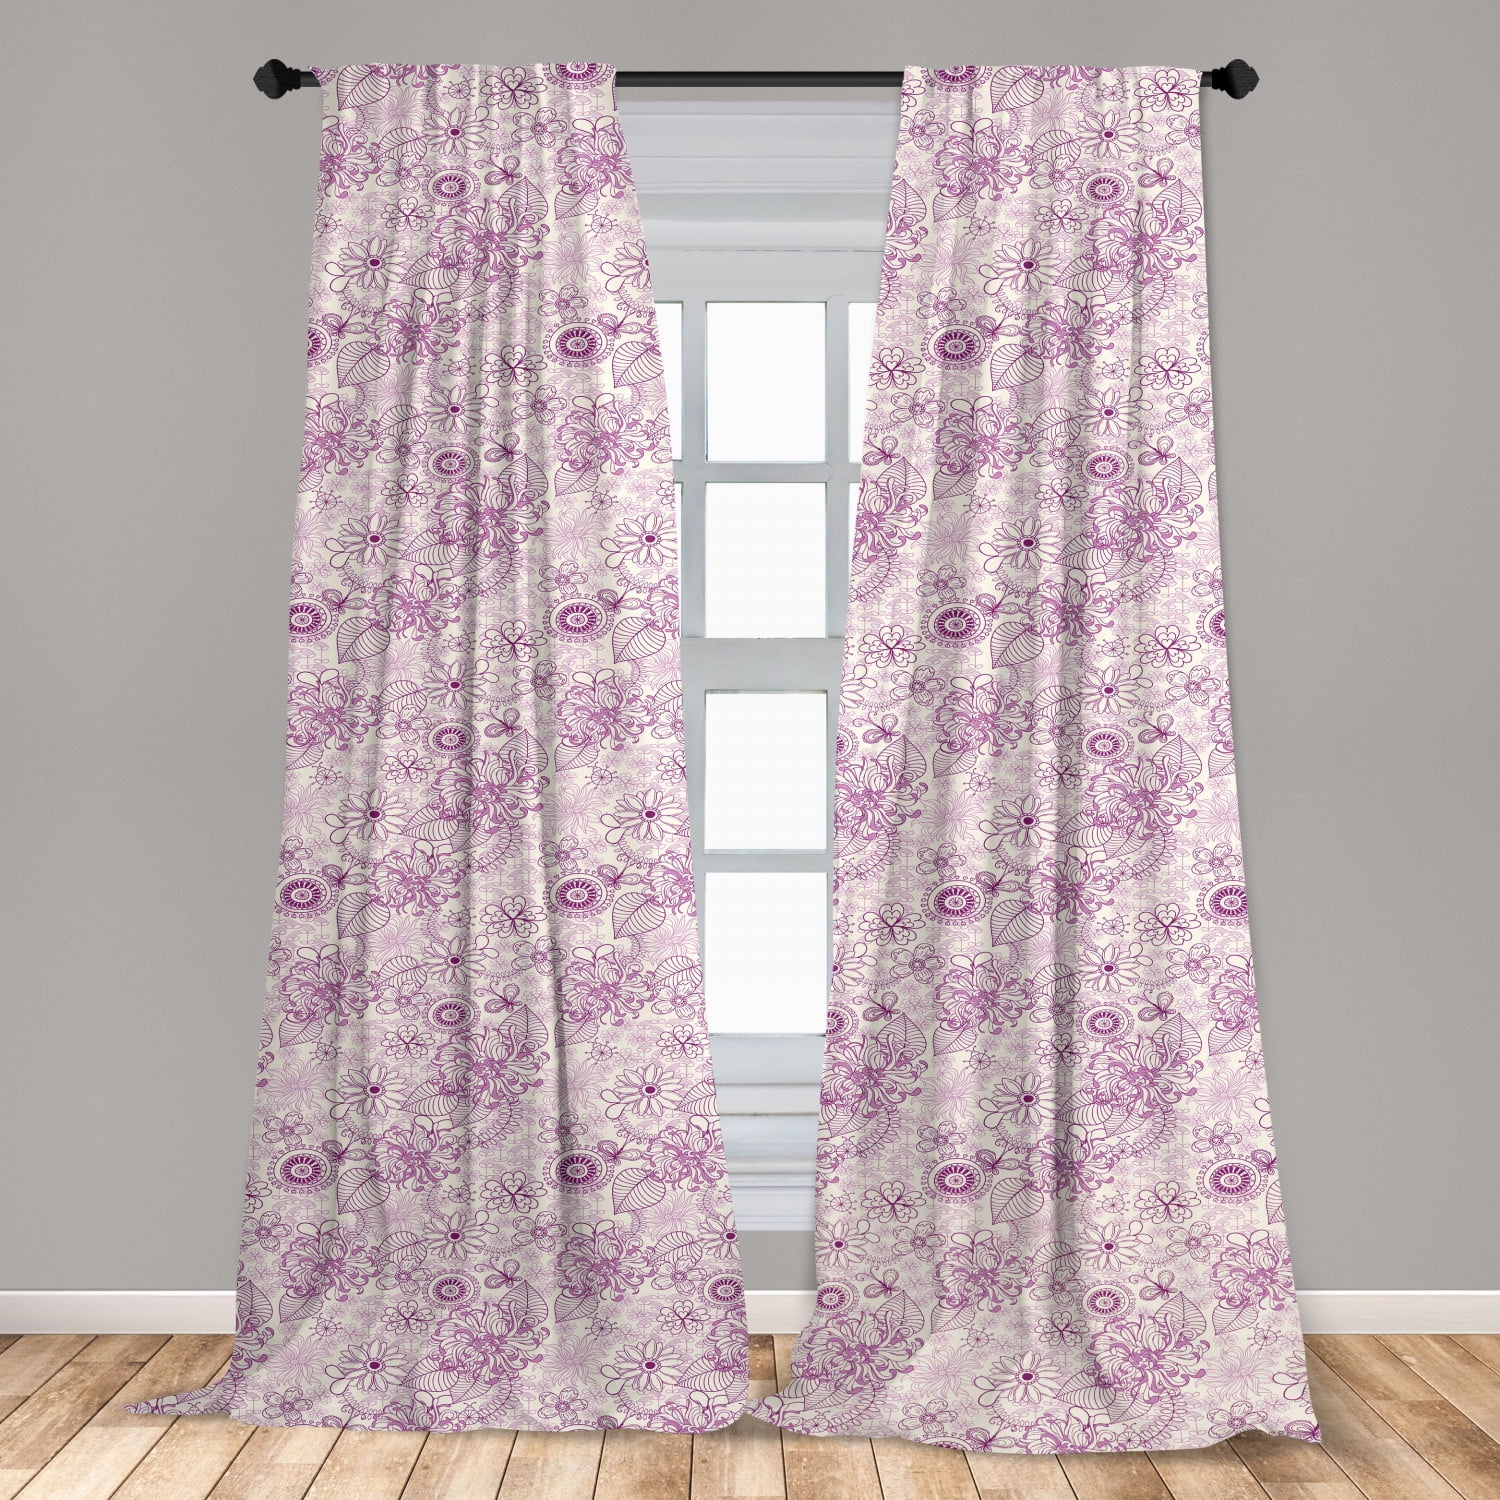 108 X 108 Apricot Violet Detail of Scenic Gardening Plants Flourishing in Springtime Fresh Woods Living Room Bedroom Window Drapes 2 Panel Set Ambesonne Lavender Curtains